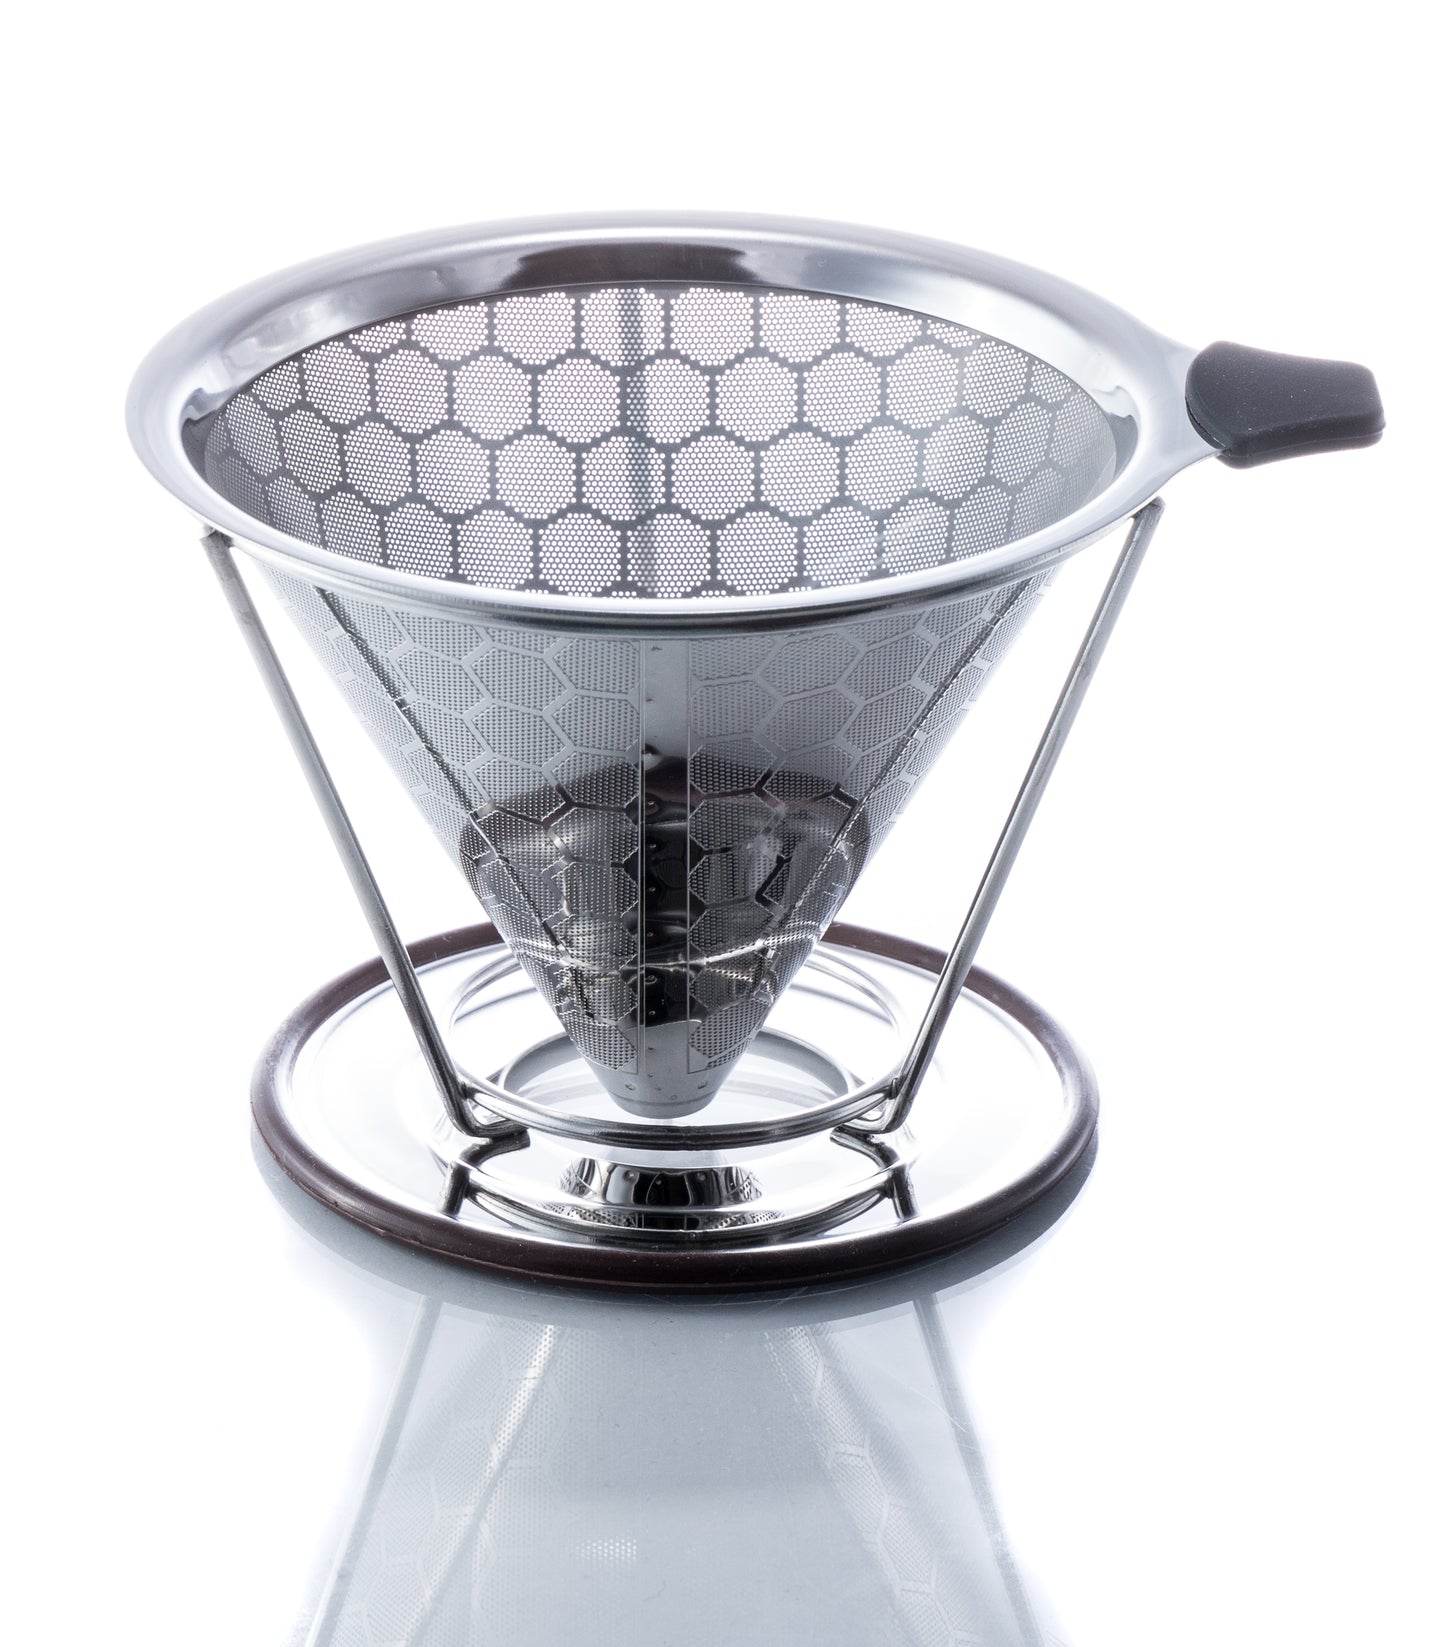 Buphallo Stainless Steel Pour-Over Coffee Filter